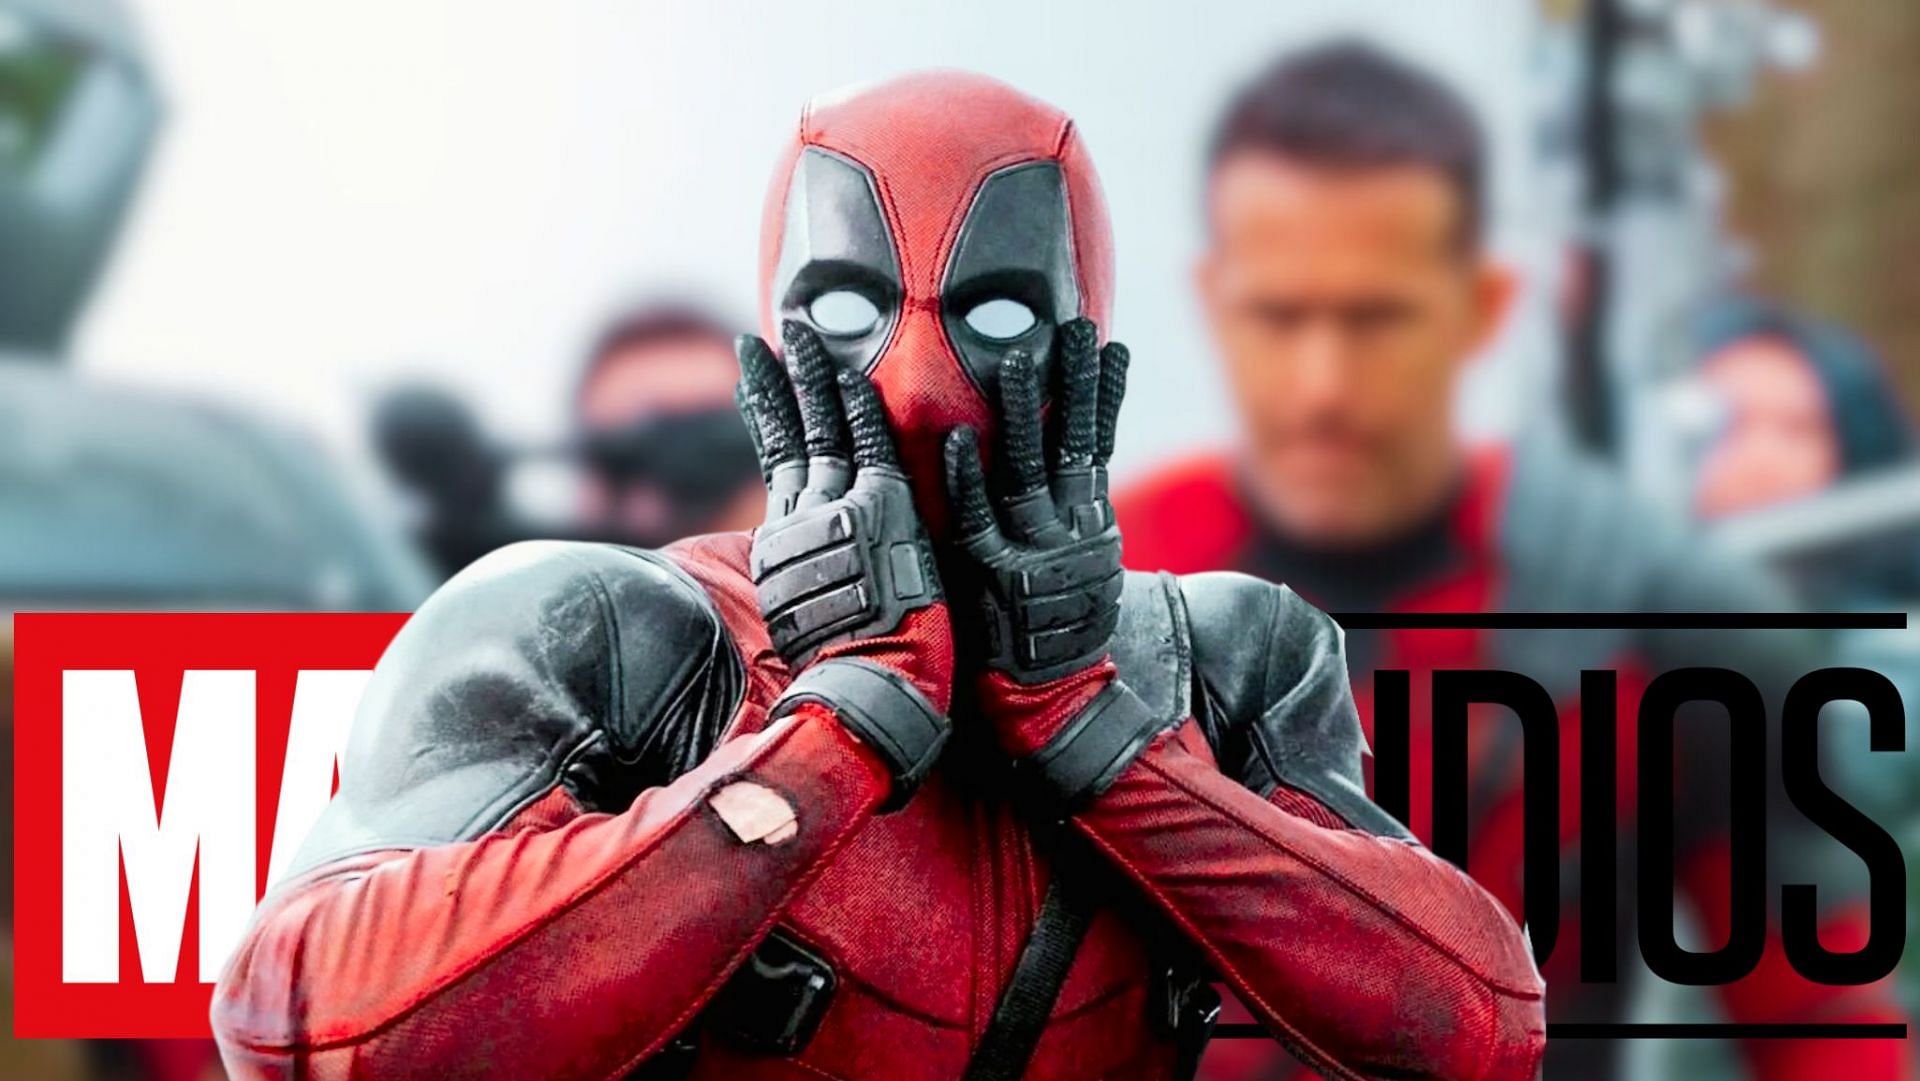 Ryan Reynolds “leaks” pics from the sets of Deadpool 3. Check them